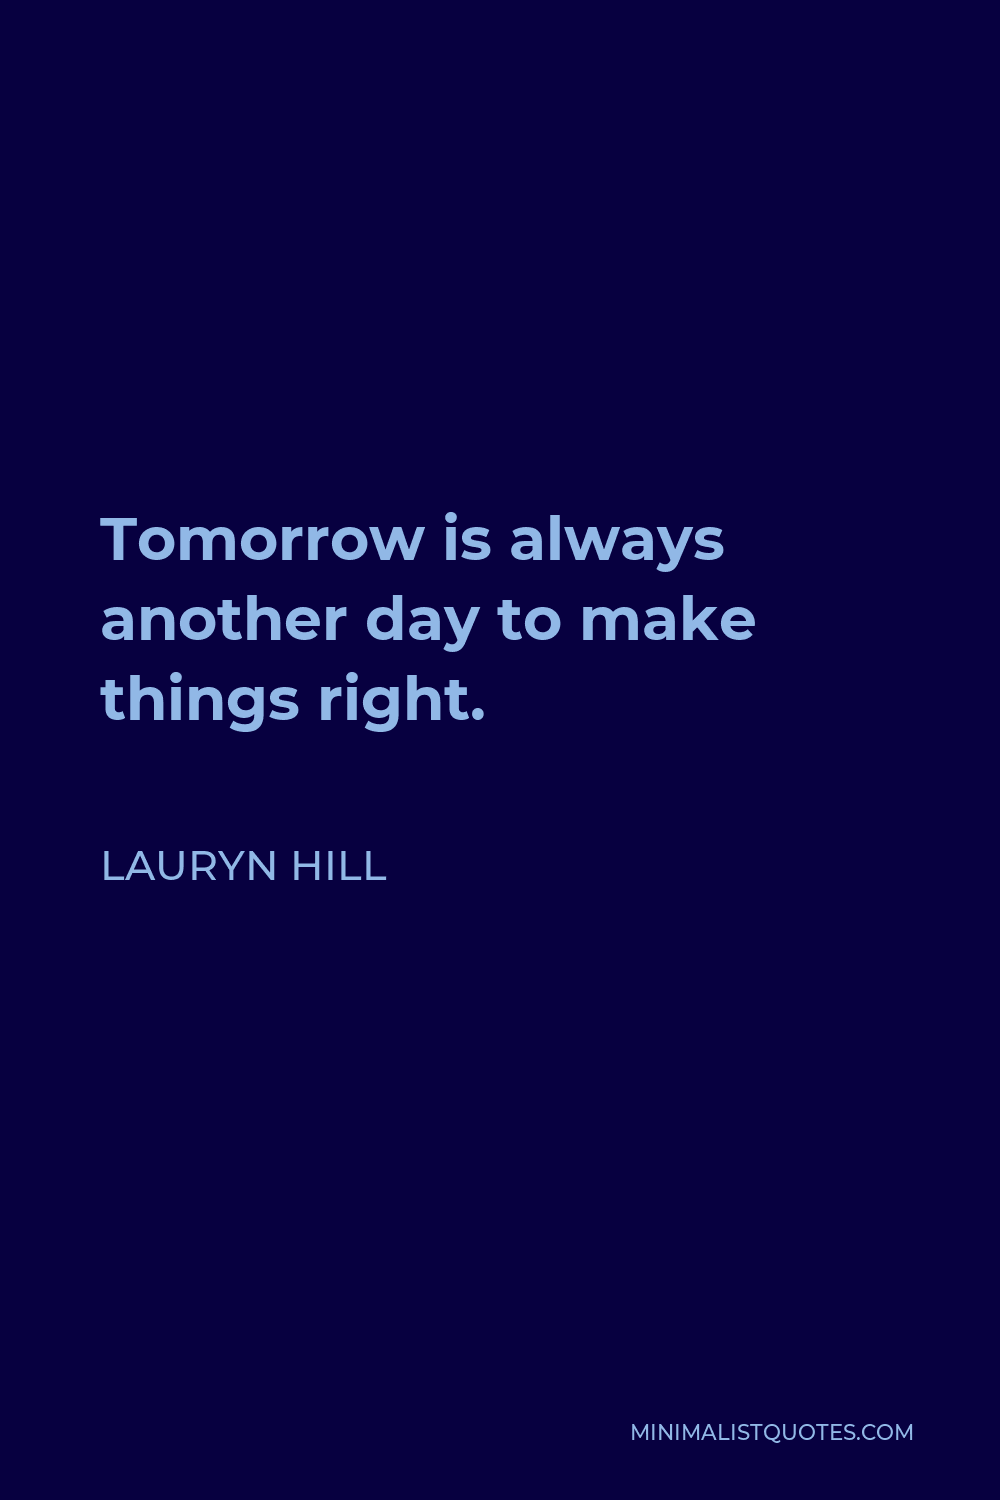 Lauryn Hill Quote - Tomorrow is always another day to make things right.